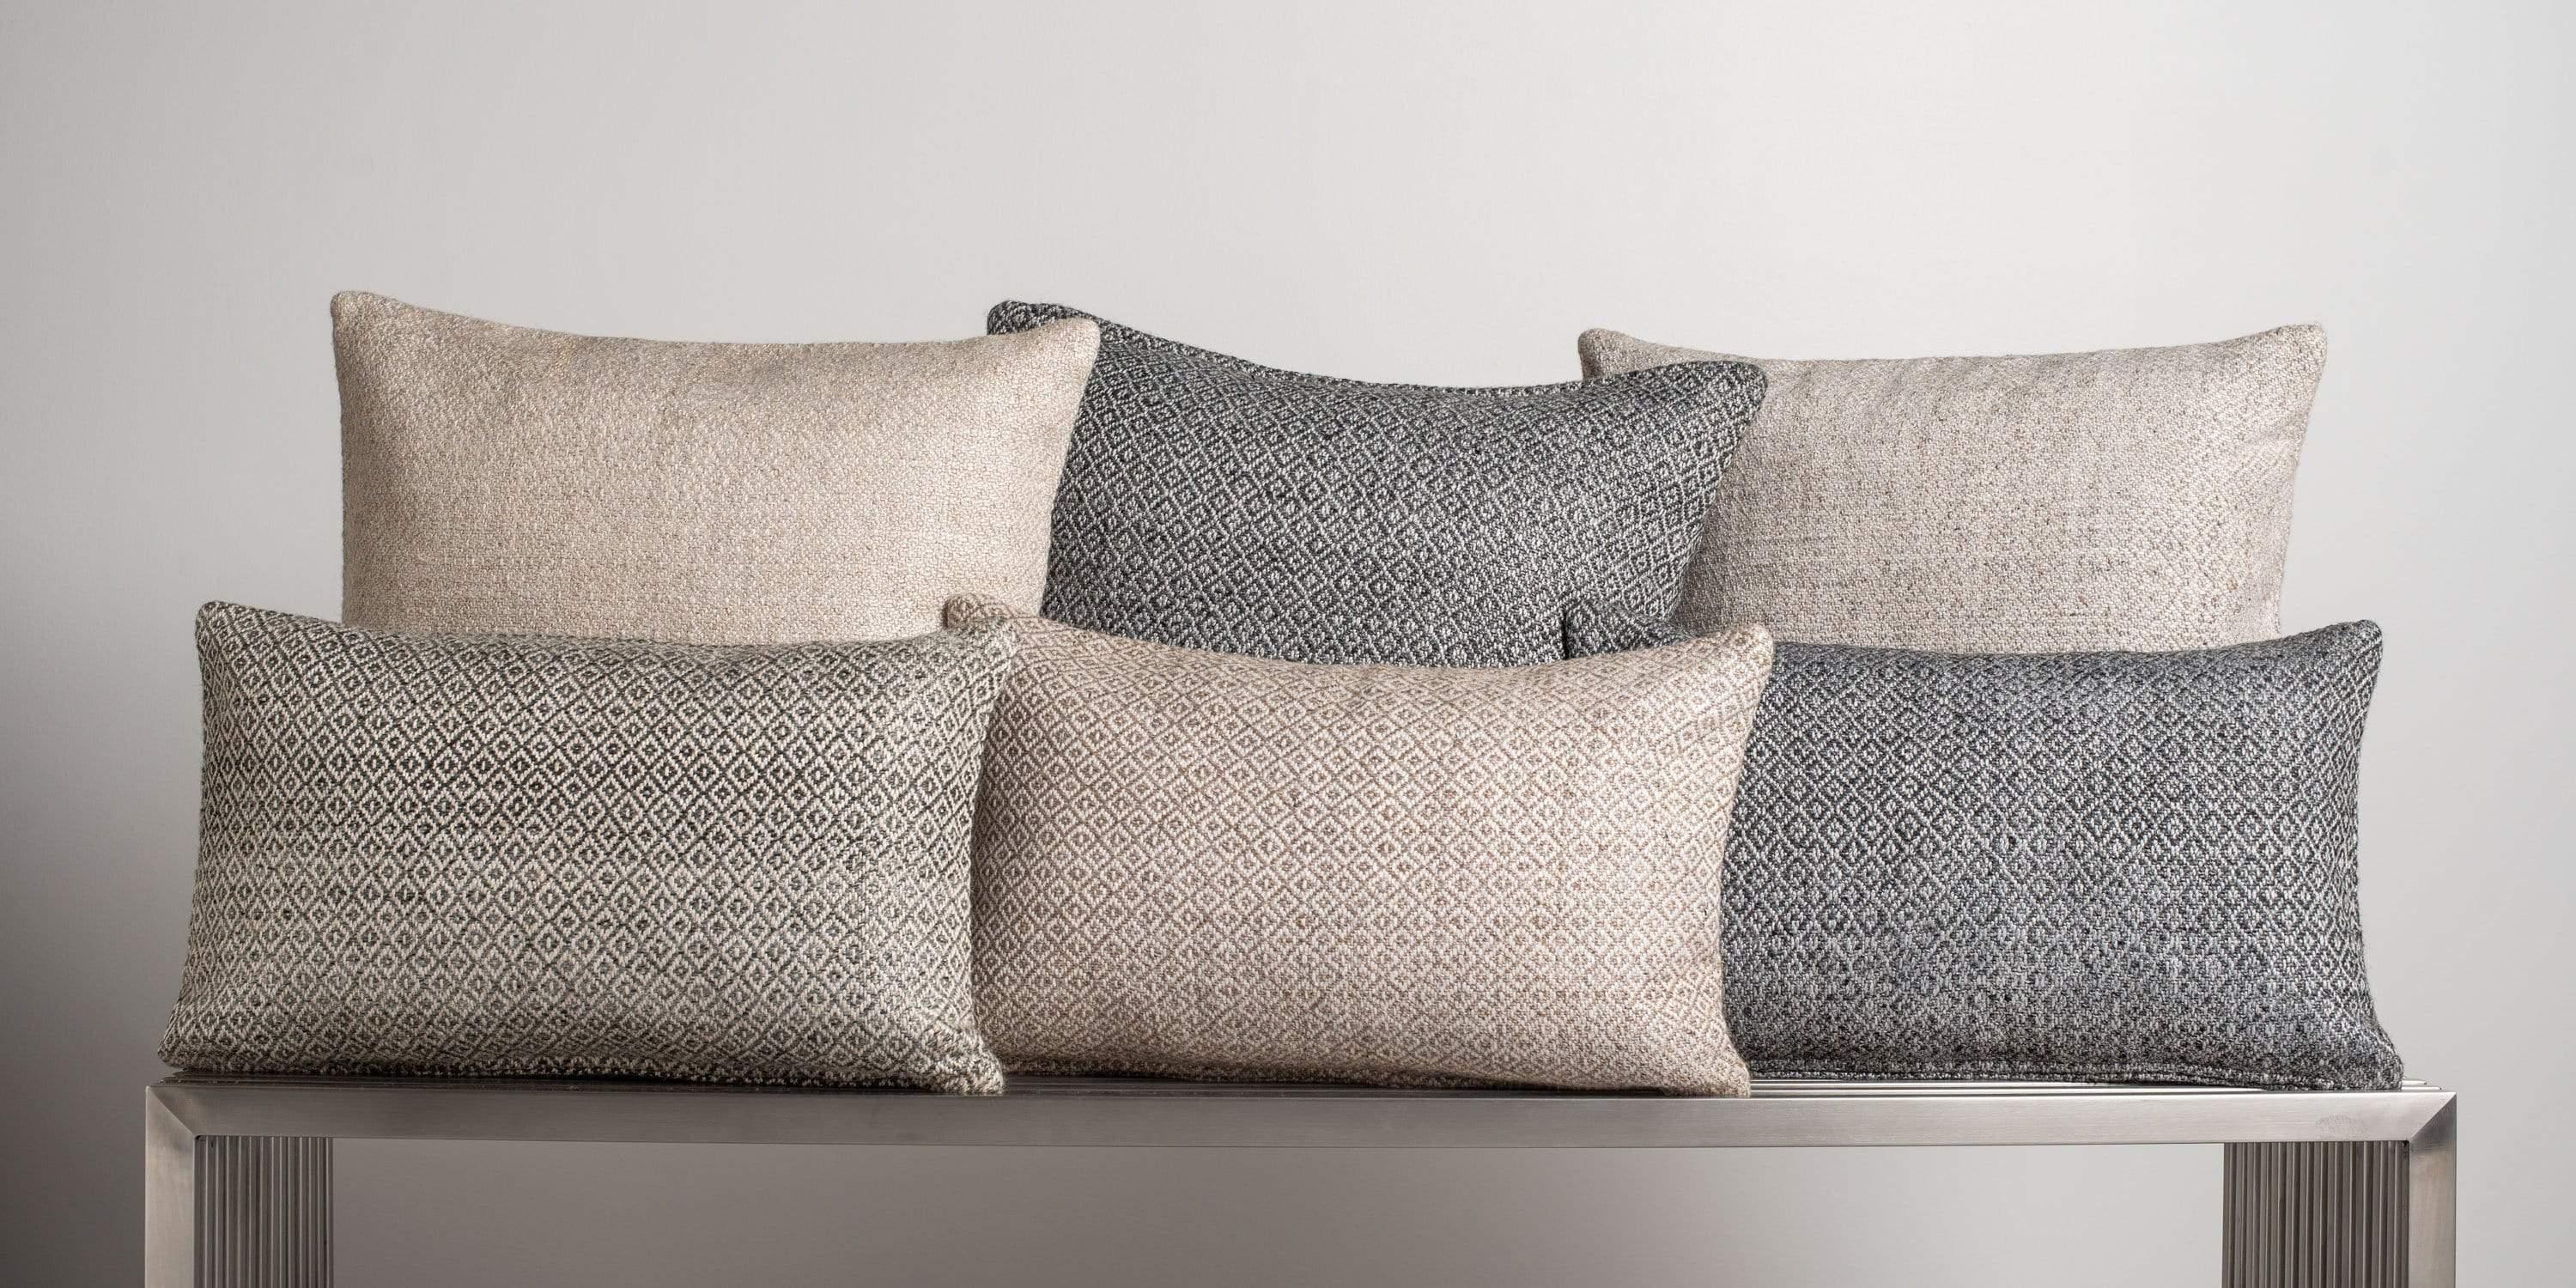 Rich in texture, woven with a subtly graphic pattern, our double-diamond pillow adds interest to your pillowscape, pair with our solid cashmere and textured pillows to round out your design. Pillow insert sold separately.

Size  26